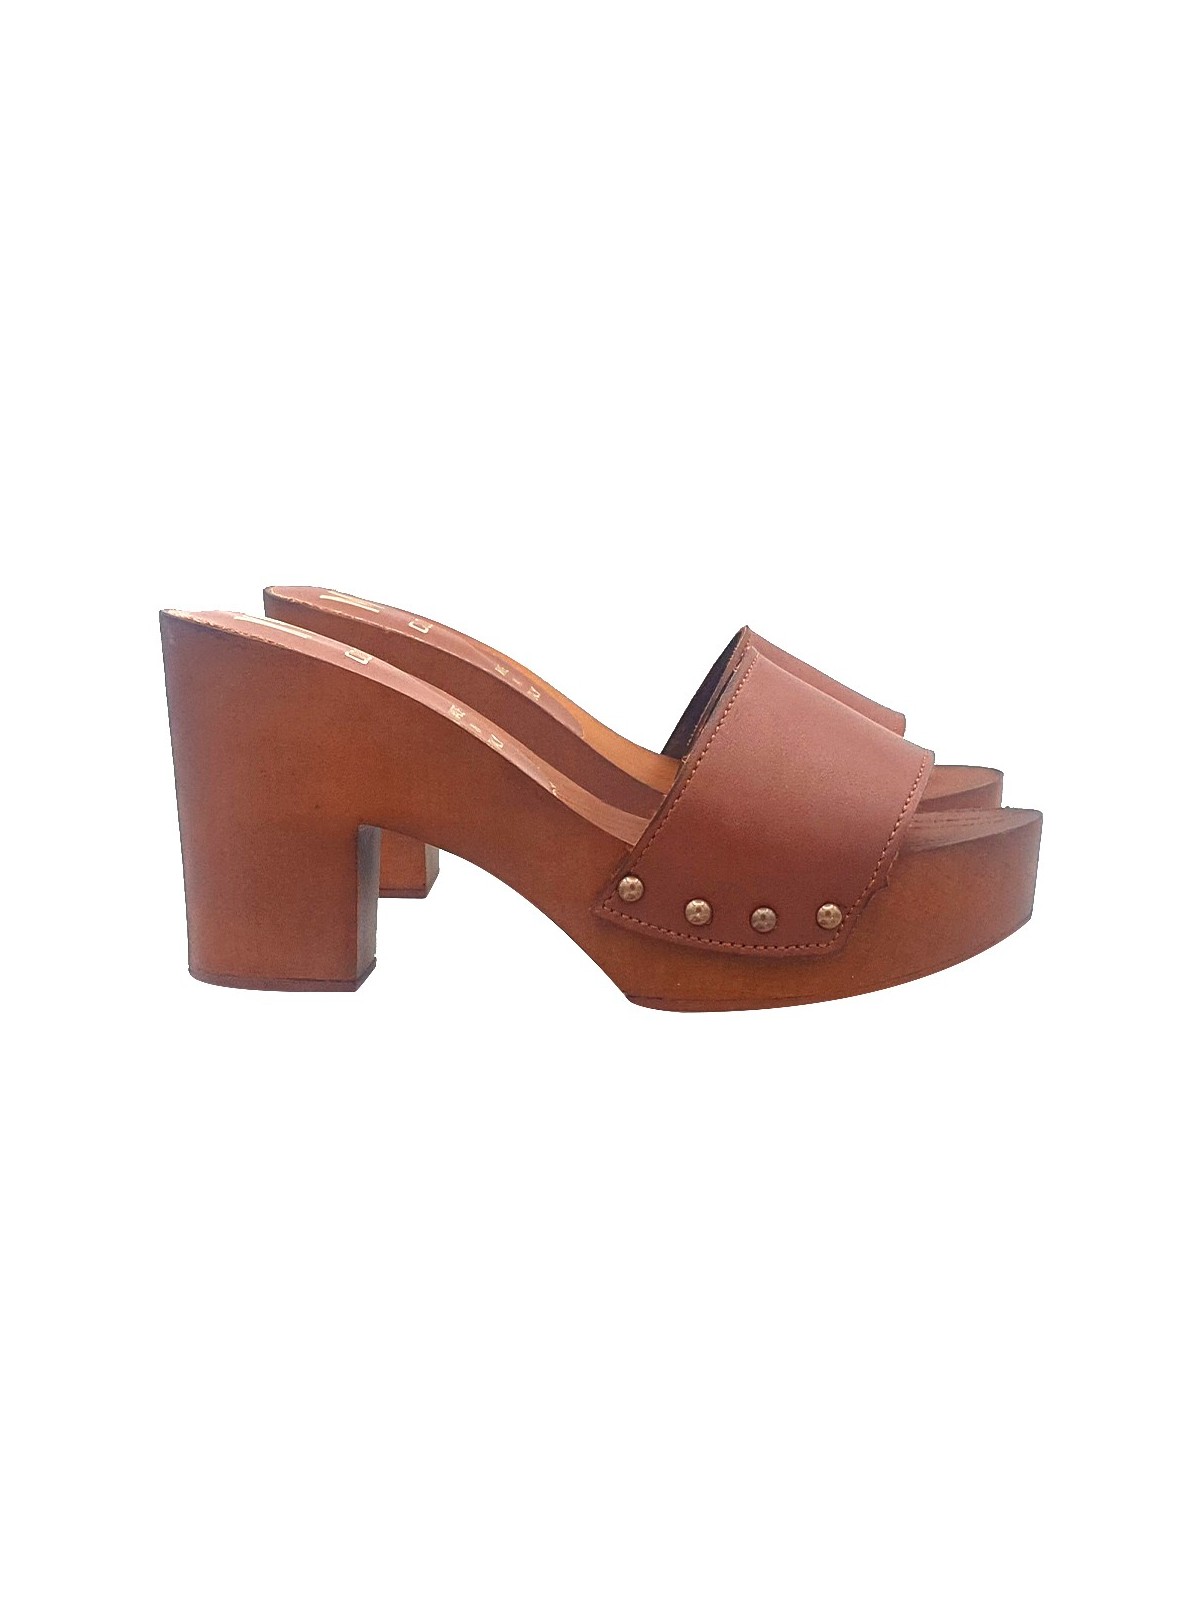 LEATHER CLOGS WITH HEEL 9 CM